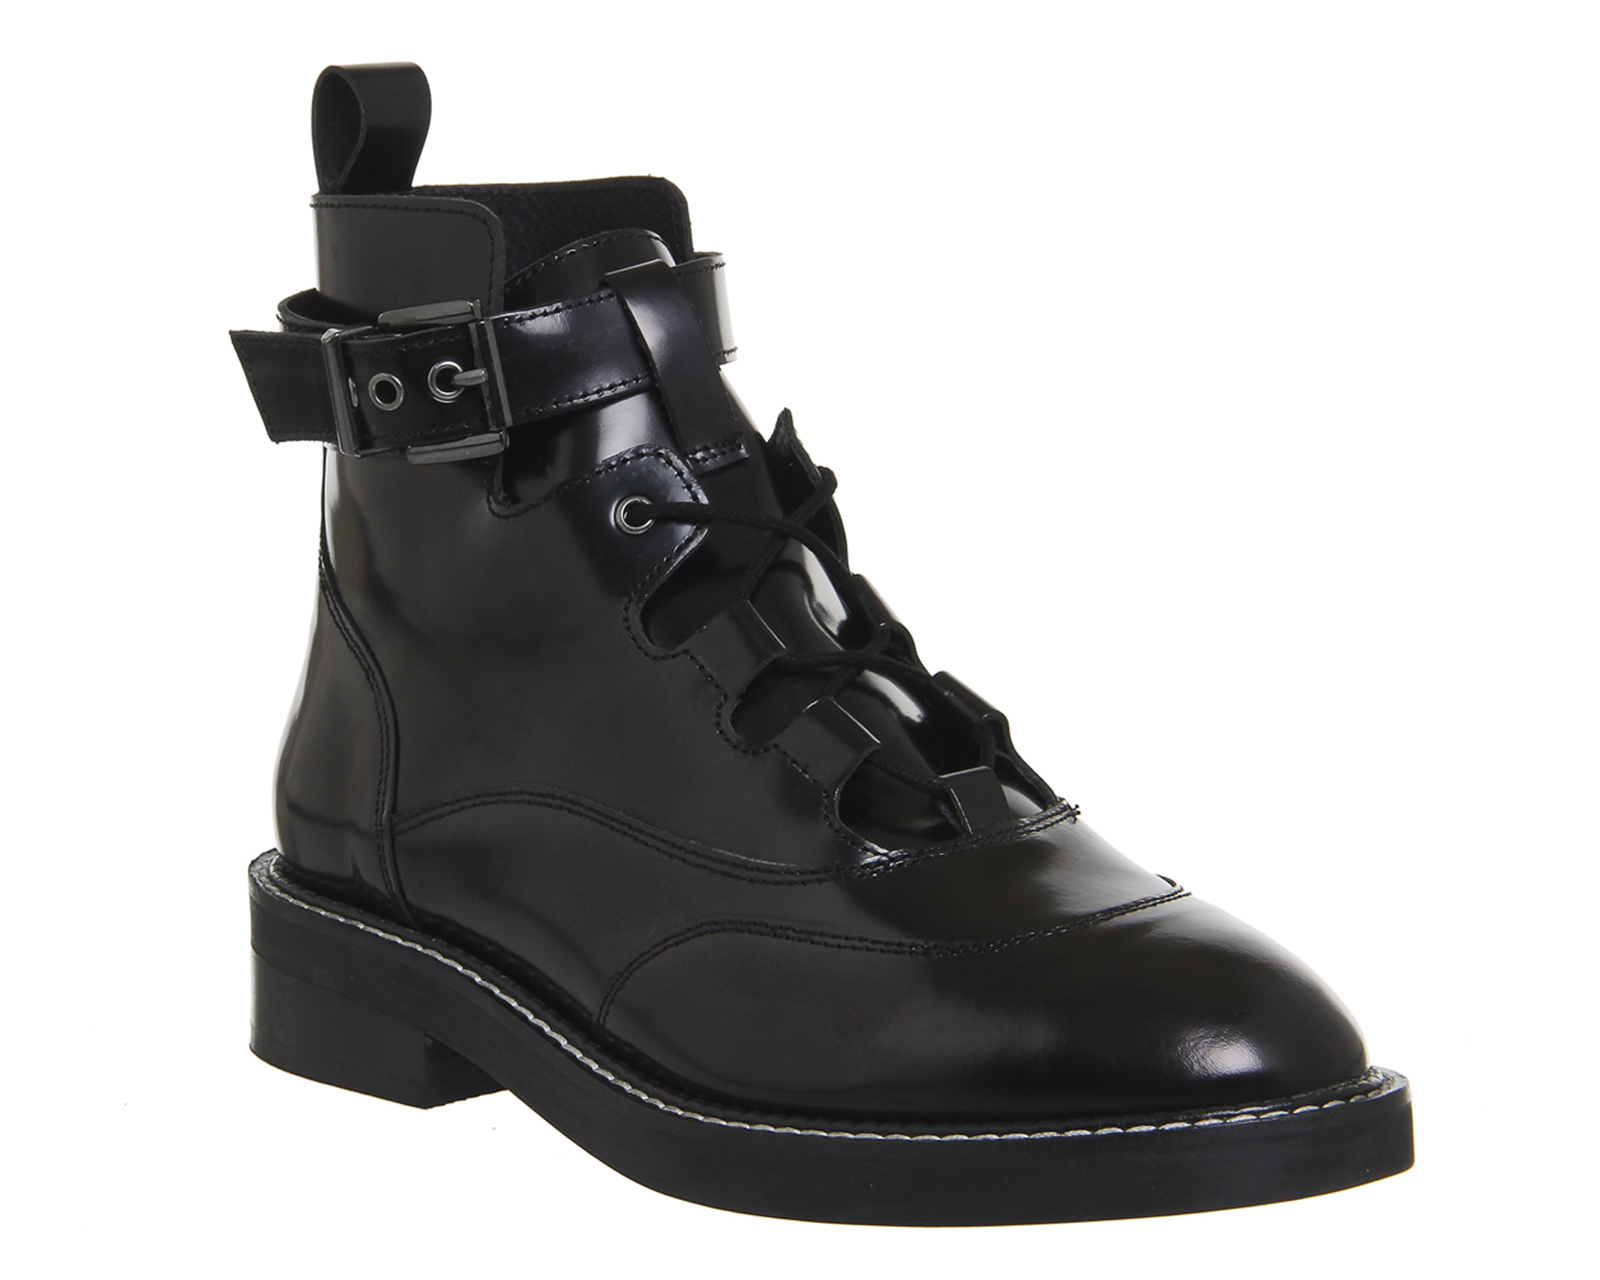 OFFICELava Lace Up Buckle BootsBlack Box Leather